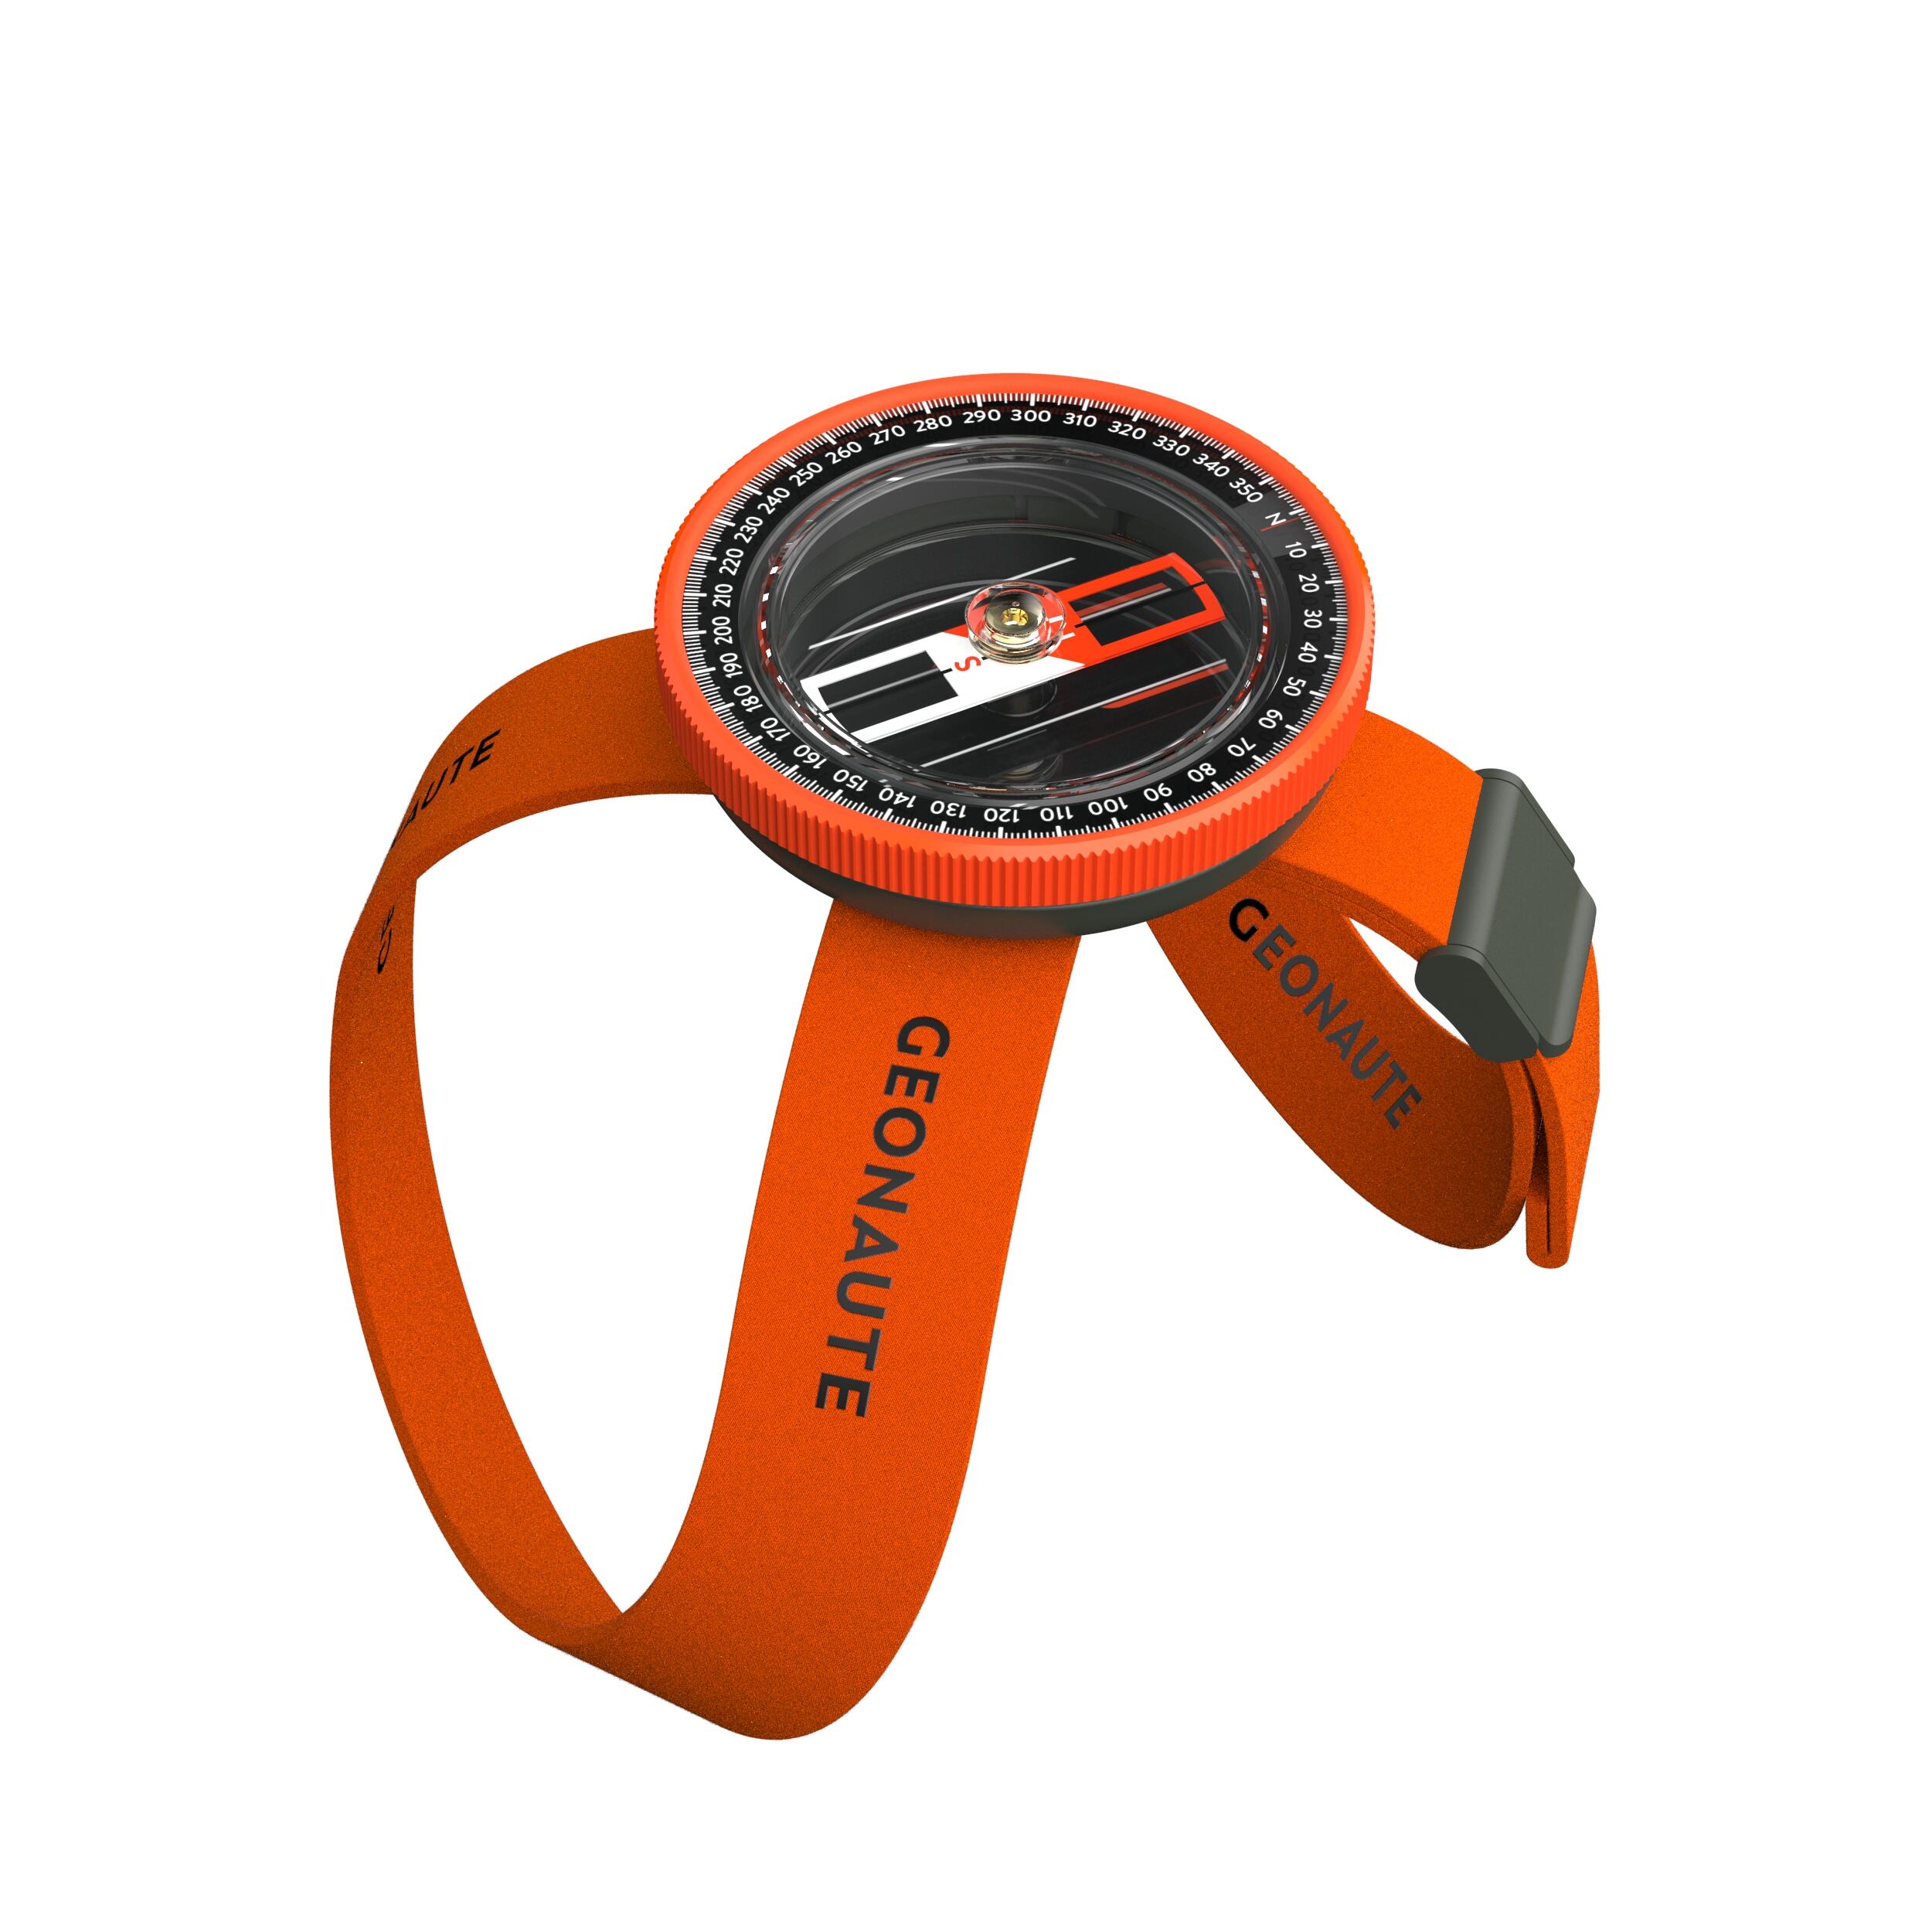 QUICK and STABLE WRIST compass for MULTISPORT adventure racing - orange black 1/6